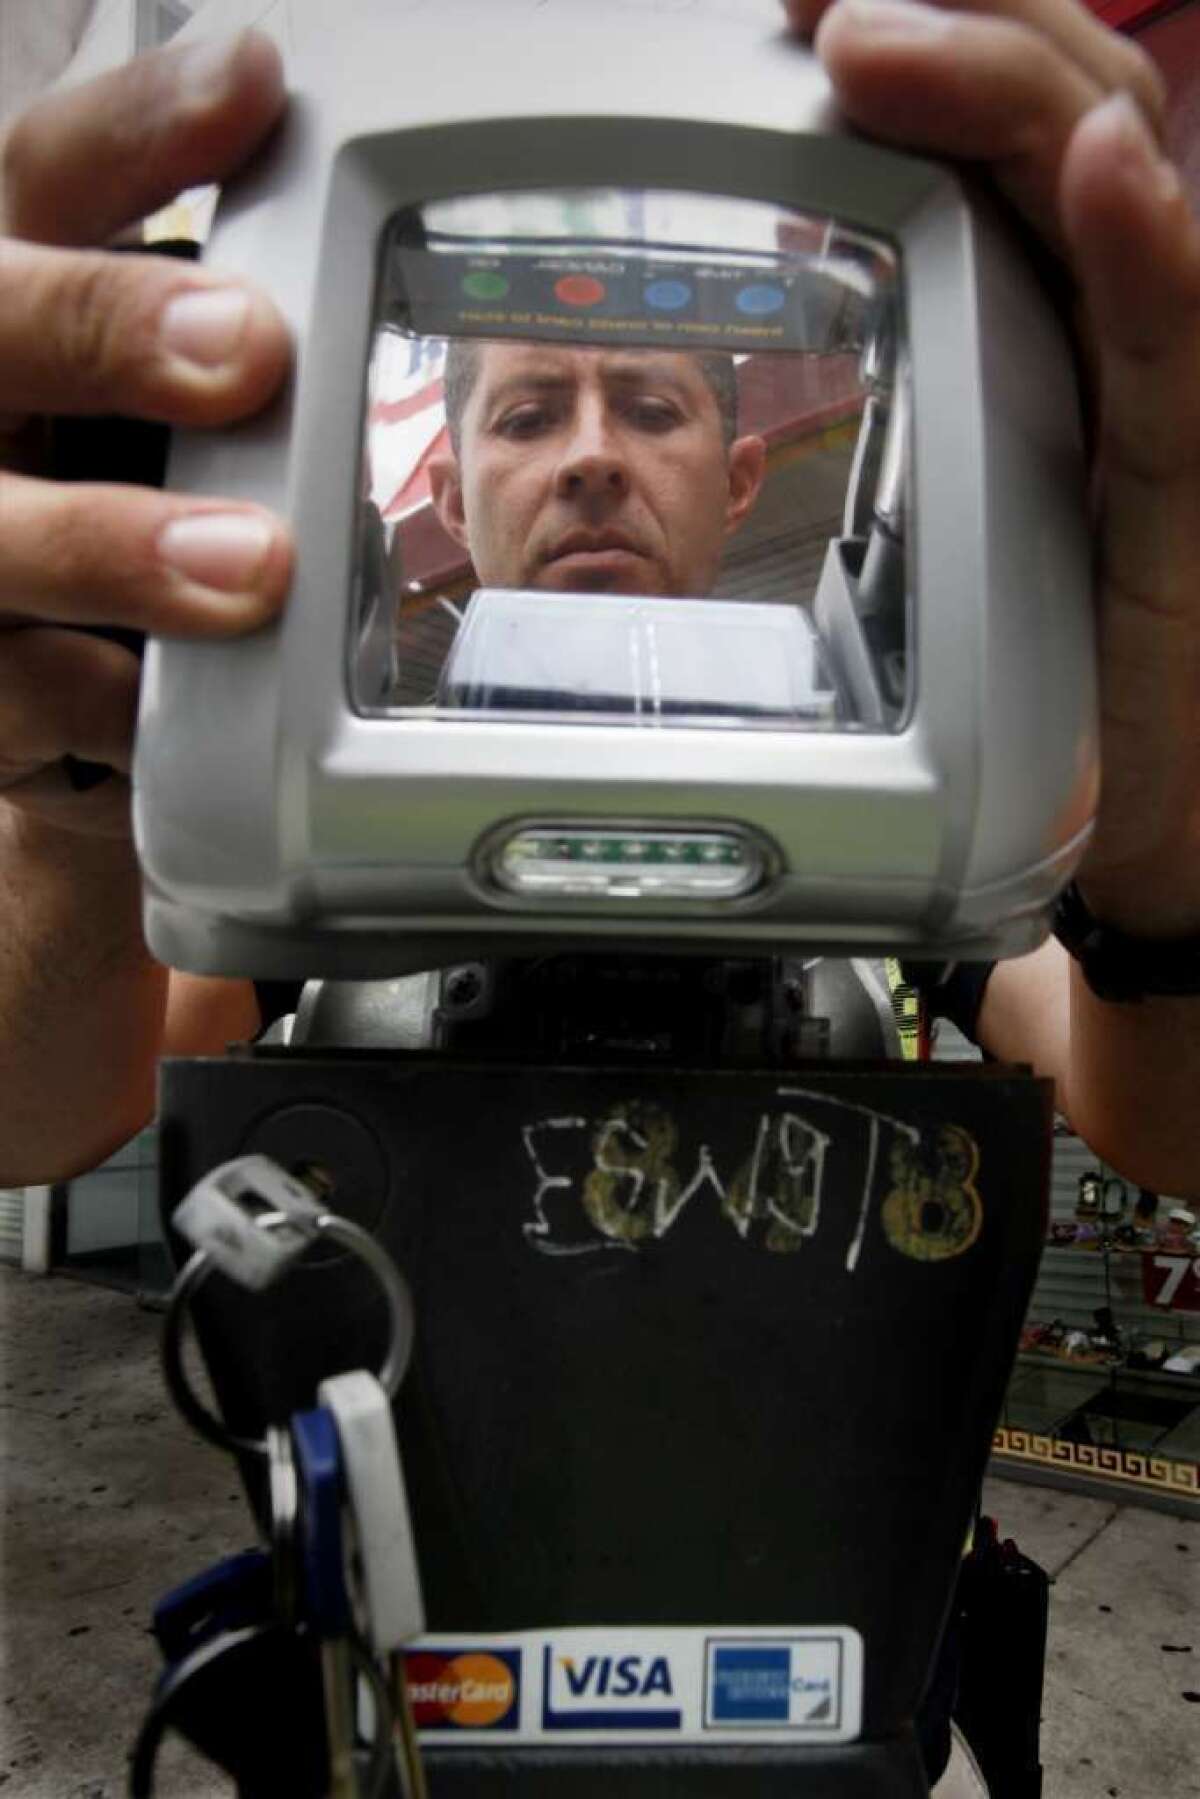 A technician reassembles a parking meter in Los Angeles that had been jammed with a wire and a gum wrapper by someone trying to beat payment in 2010. A state bill would prevent cities from ticketing drivers who park at broken meters.